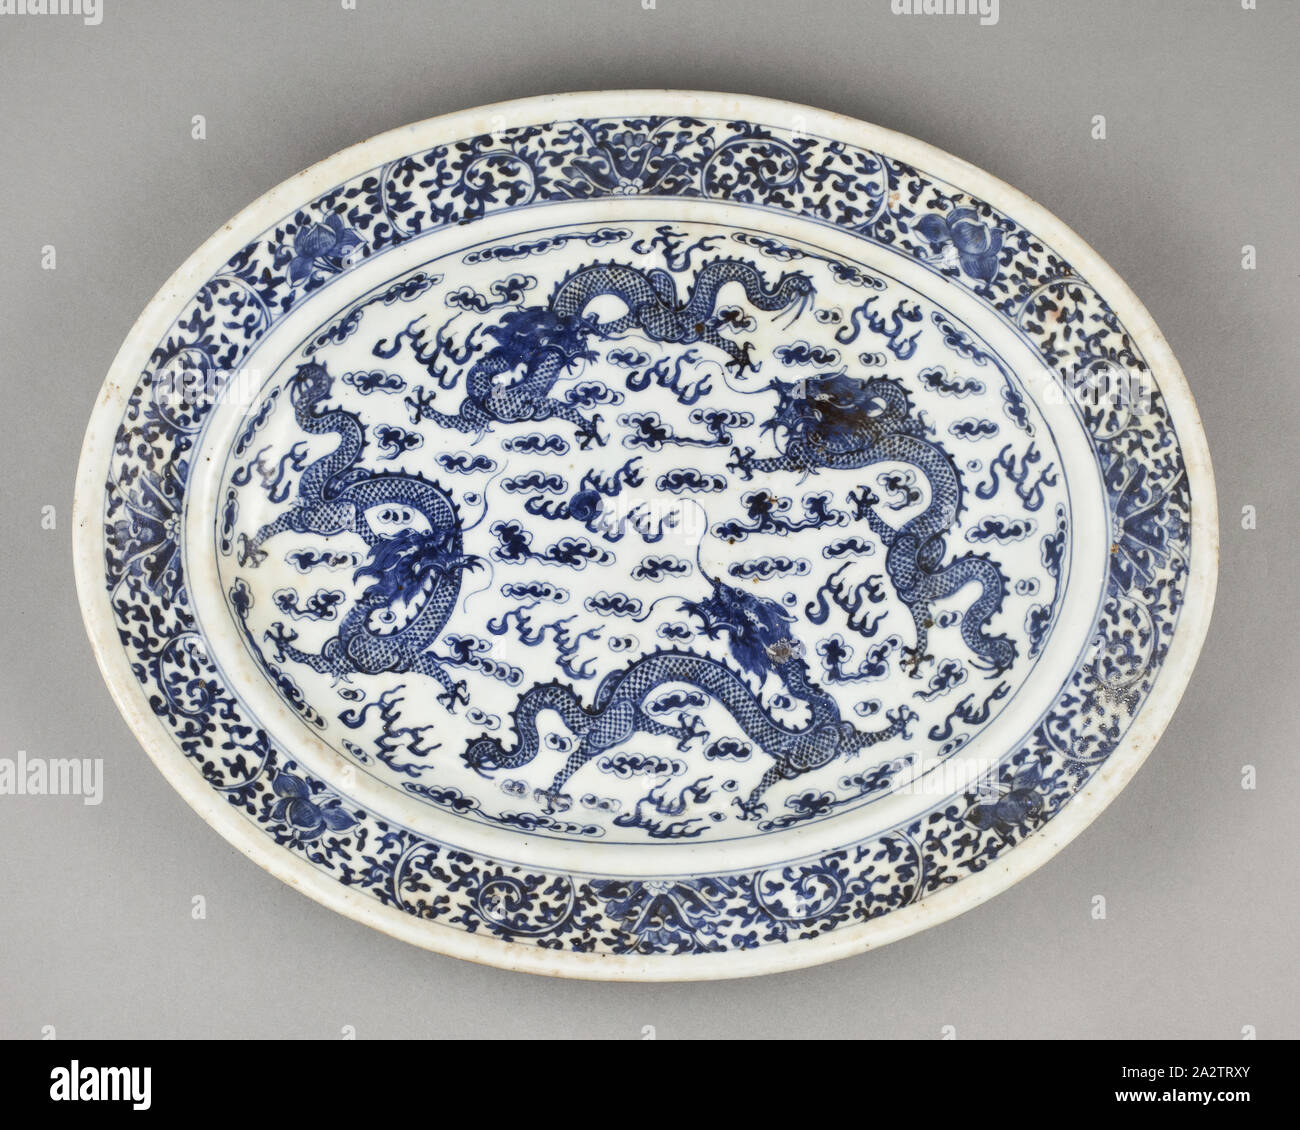 meat dish or stand for a tureen, 19th century, porcelain, 14-3/4 x 11-1/2 in., Asian Art Stock Photo